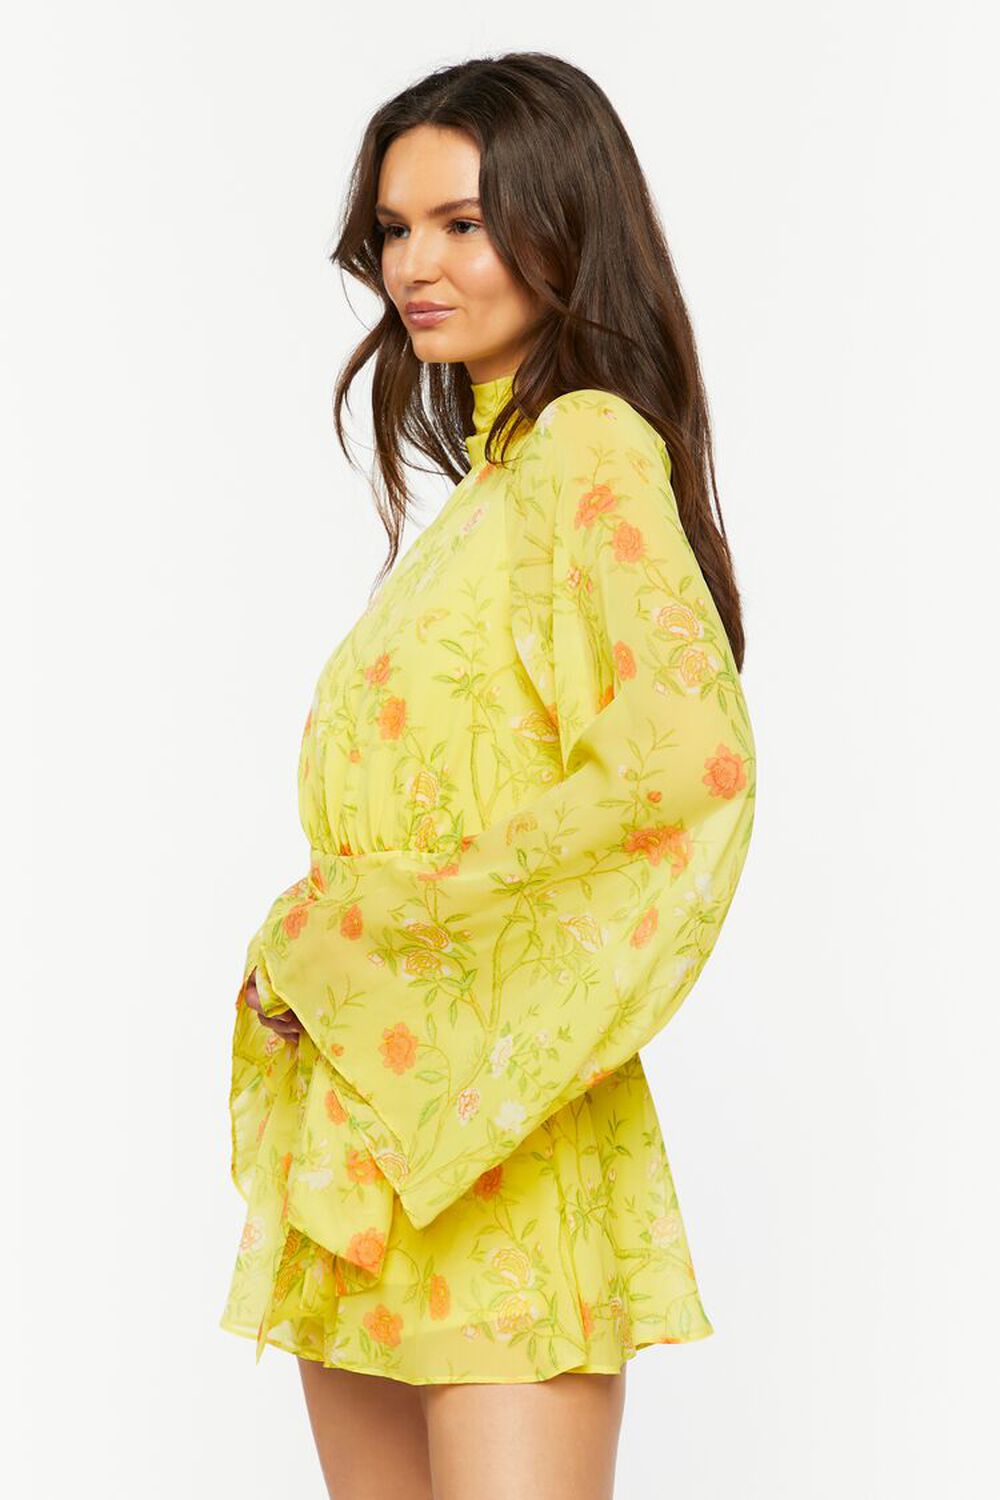 YELLOW/MULTI Floral Chiffon Bell-Sleeve Romper, image 2